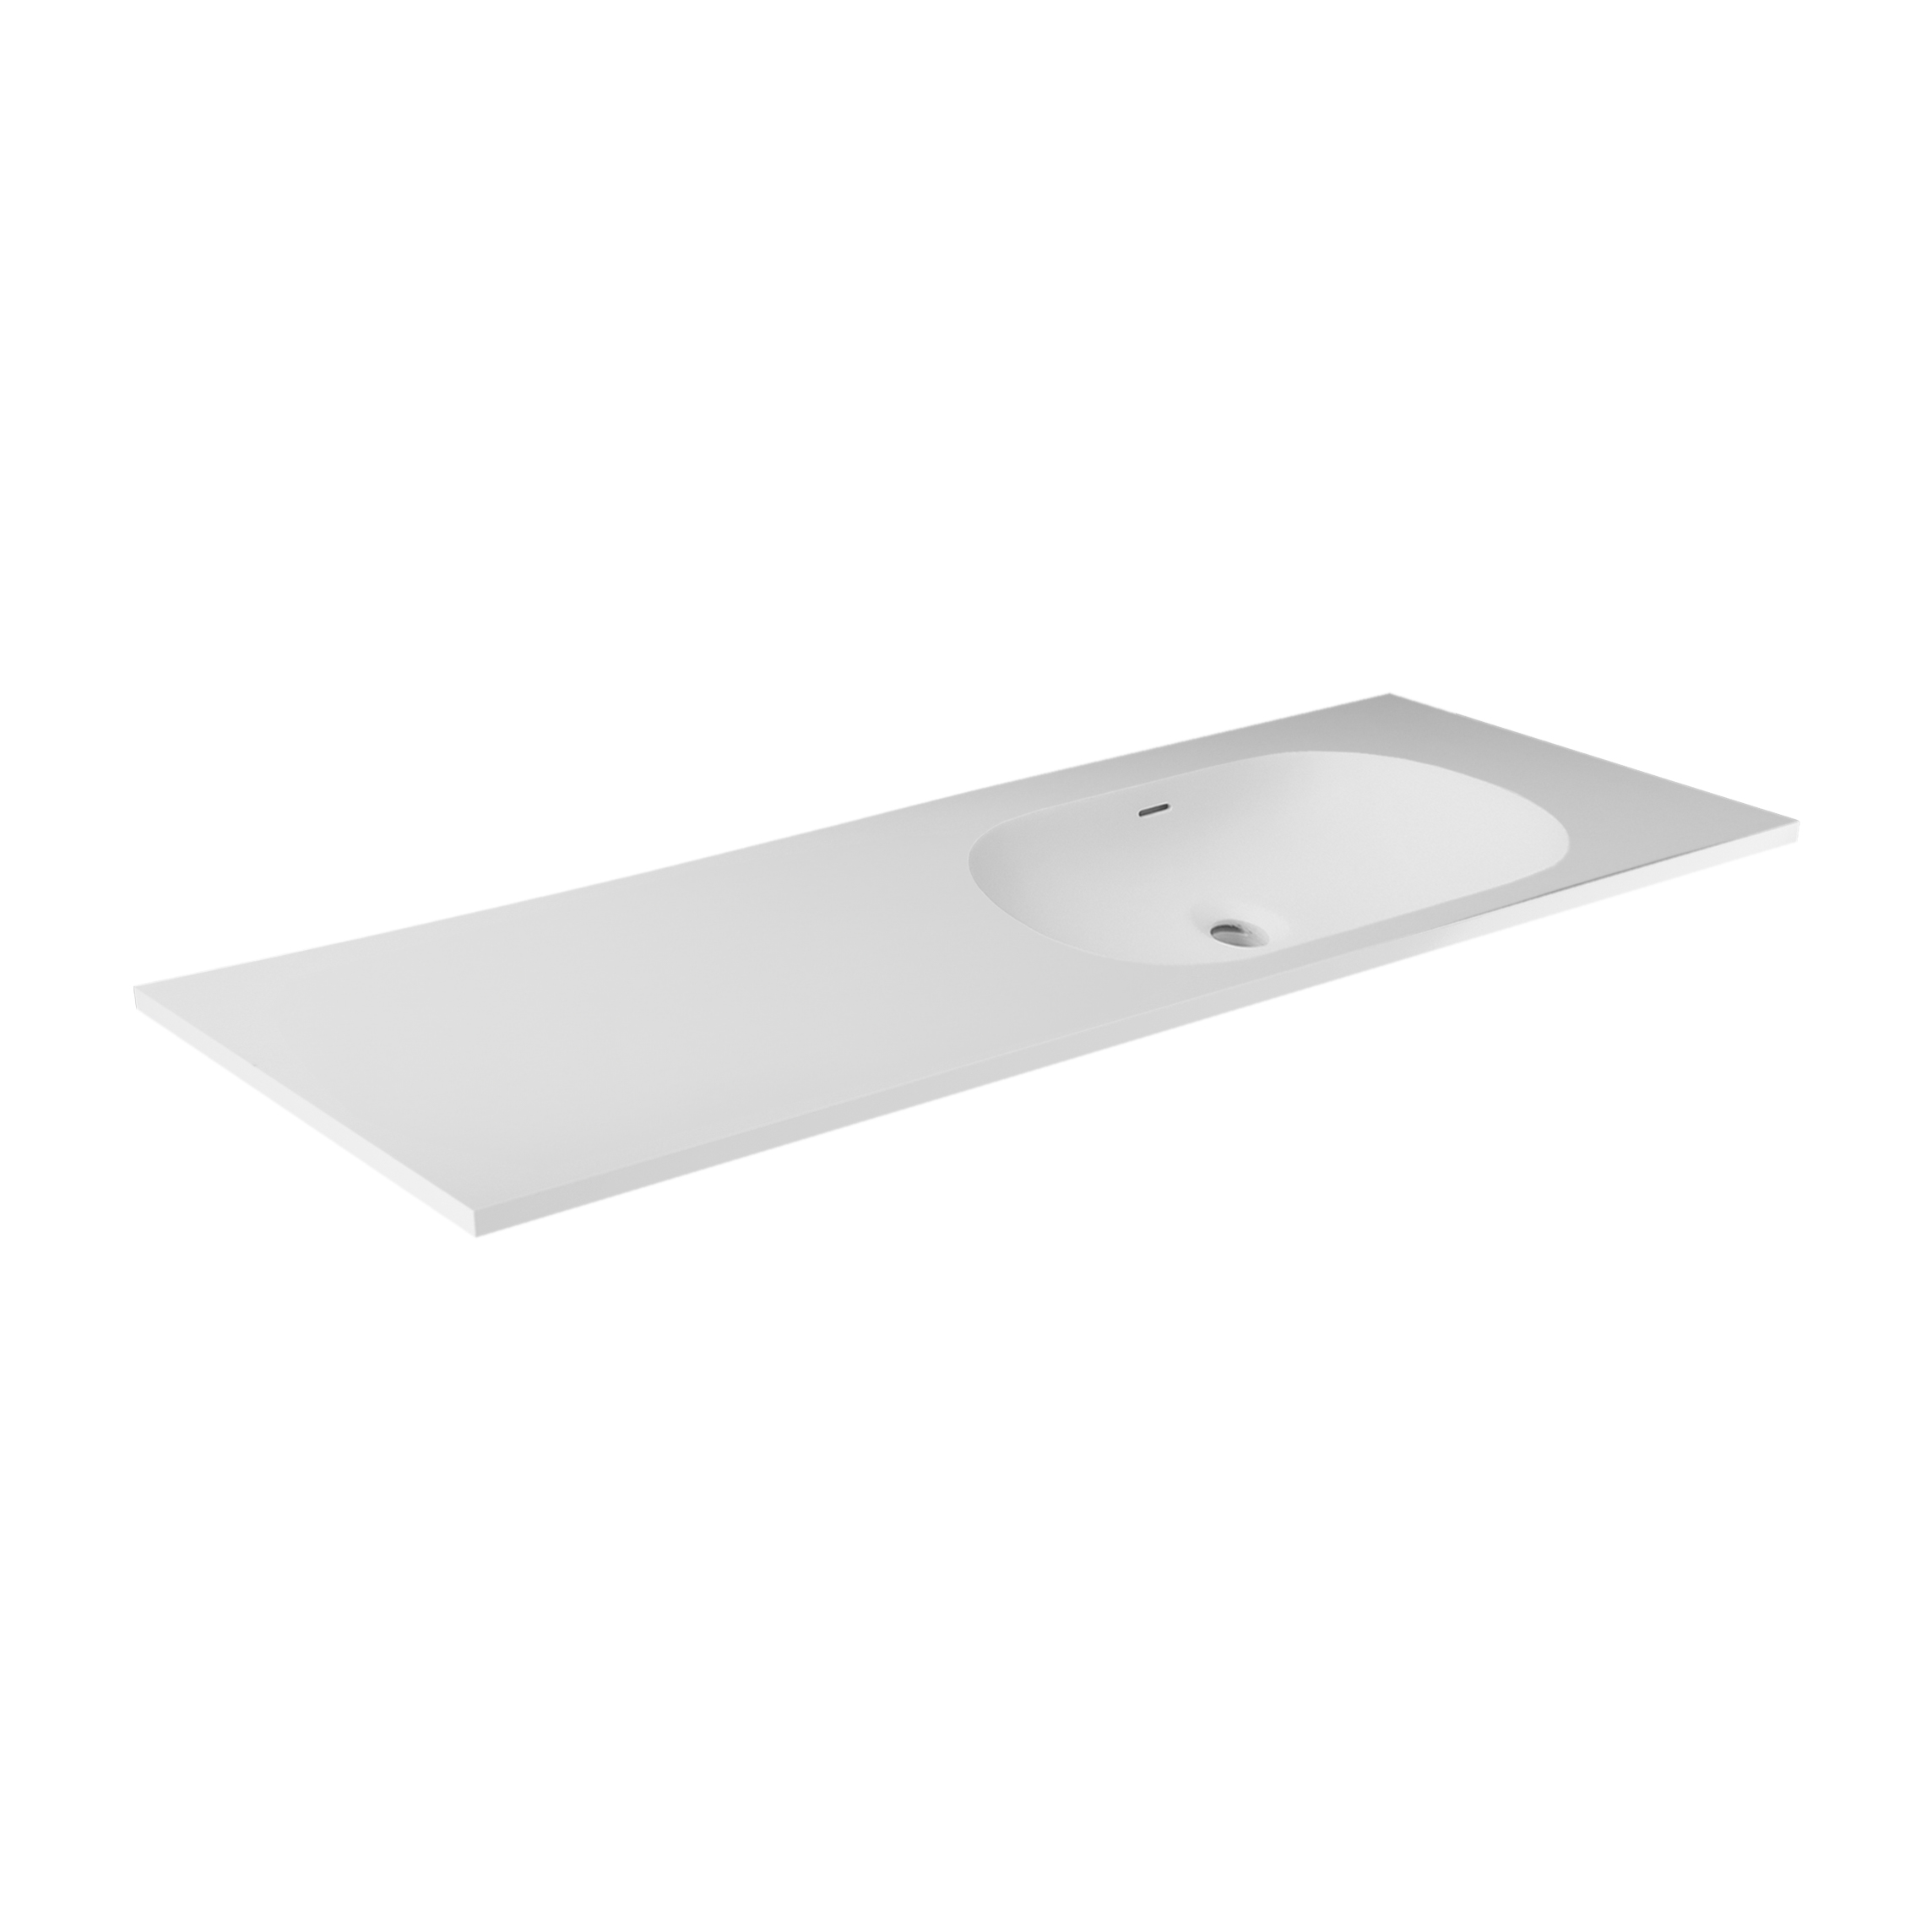 ELECAST OVALE VANITY TOP 1190X455X130MM SINGLE RIGHT BOWL NTH WHITE